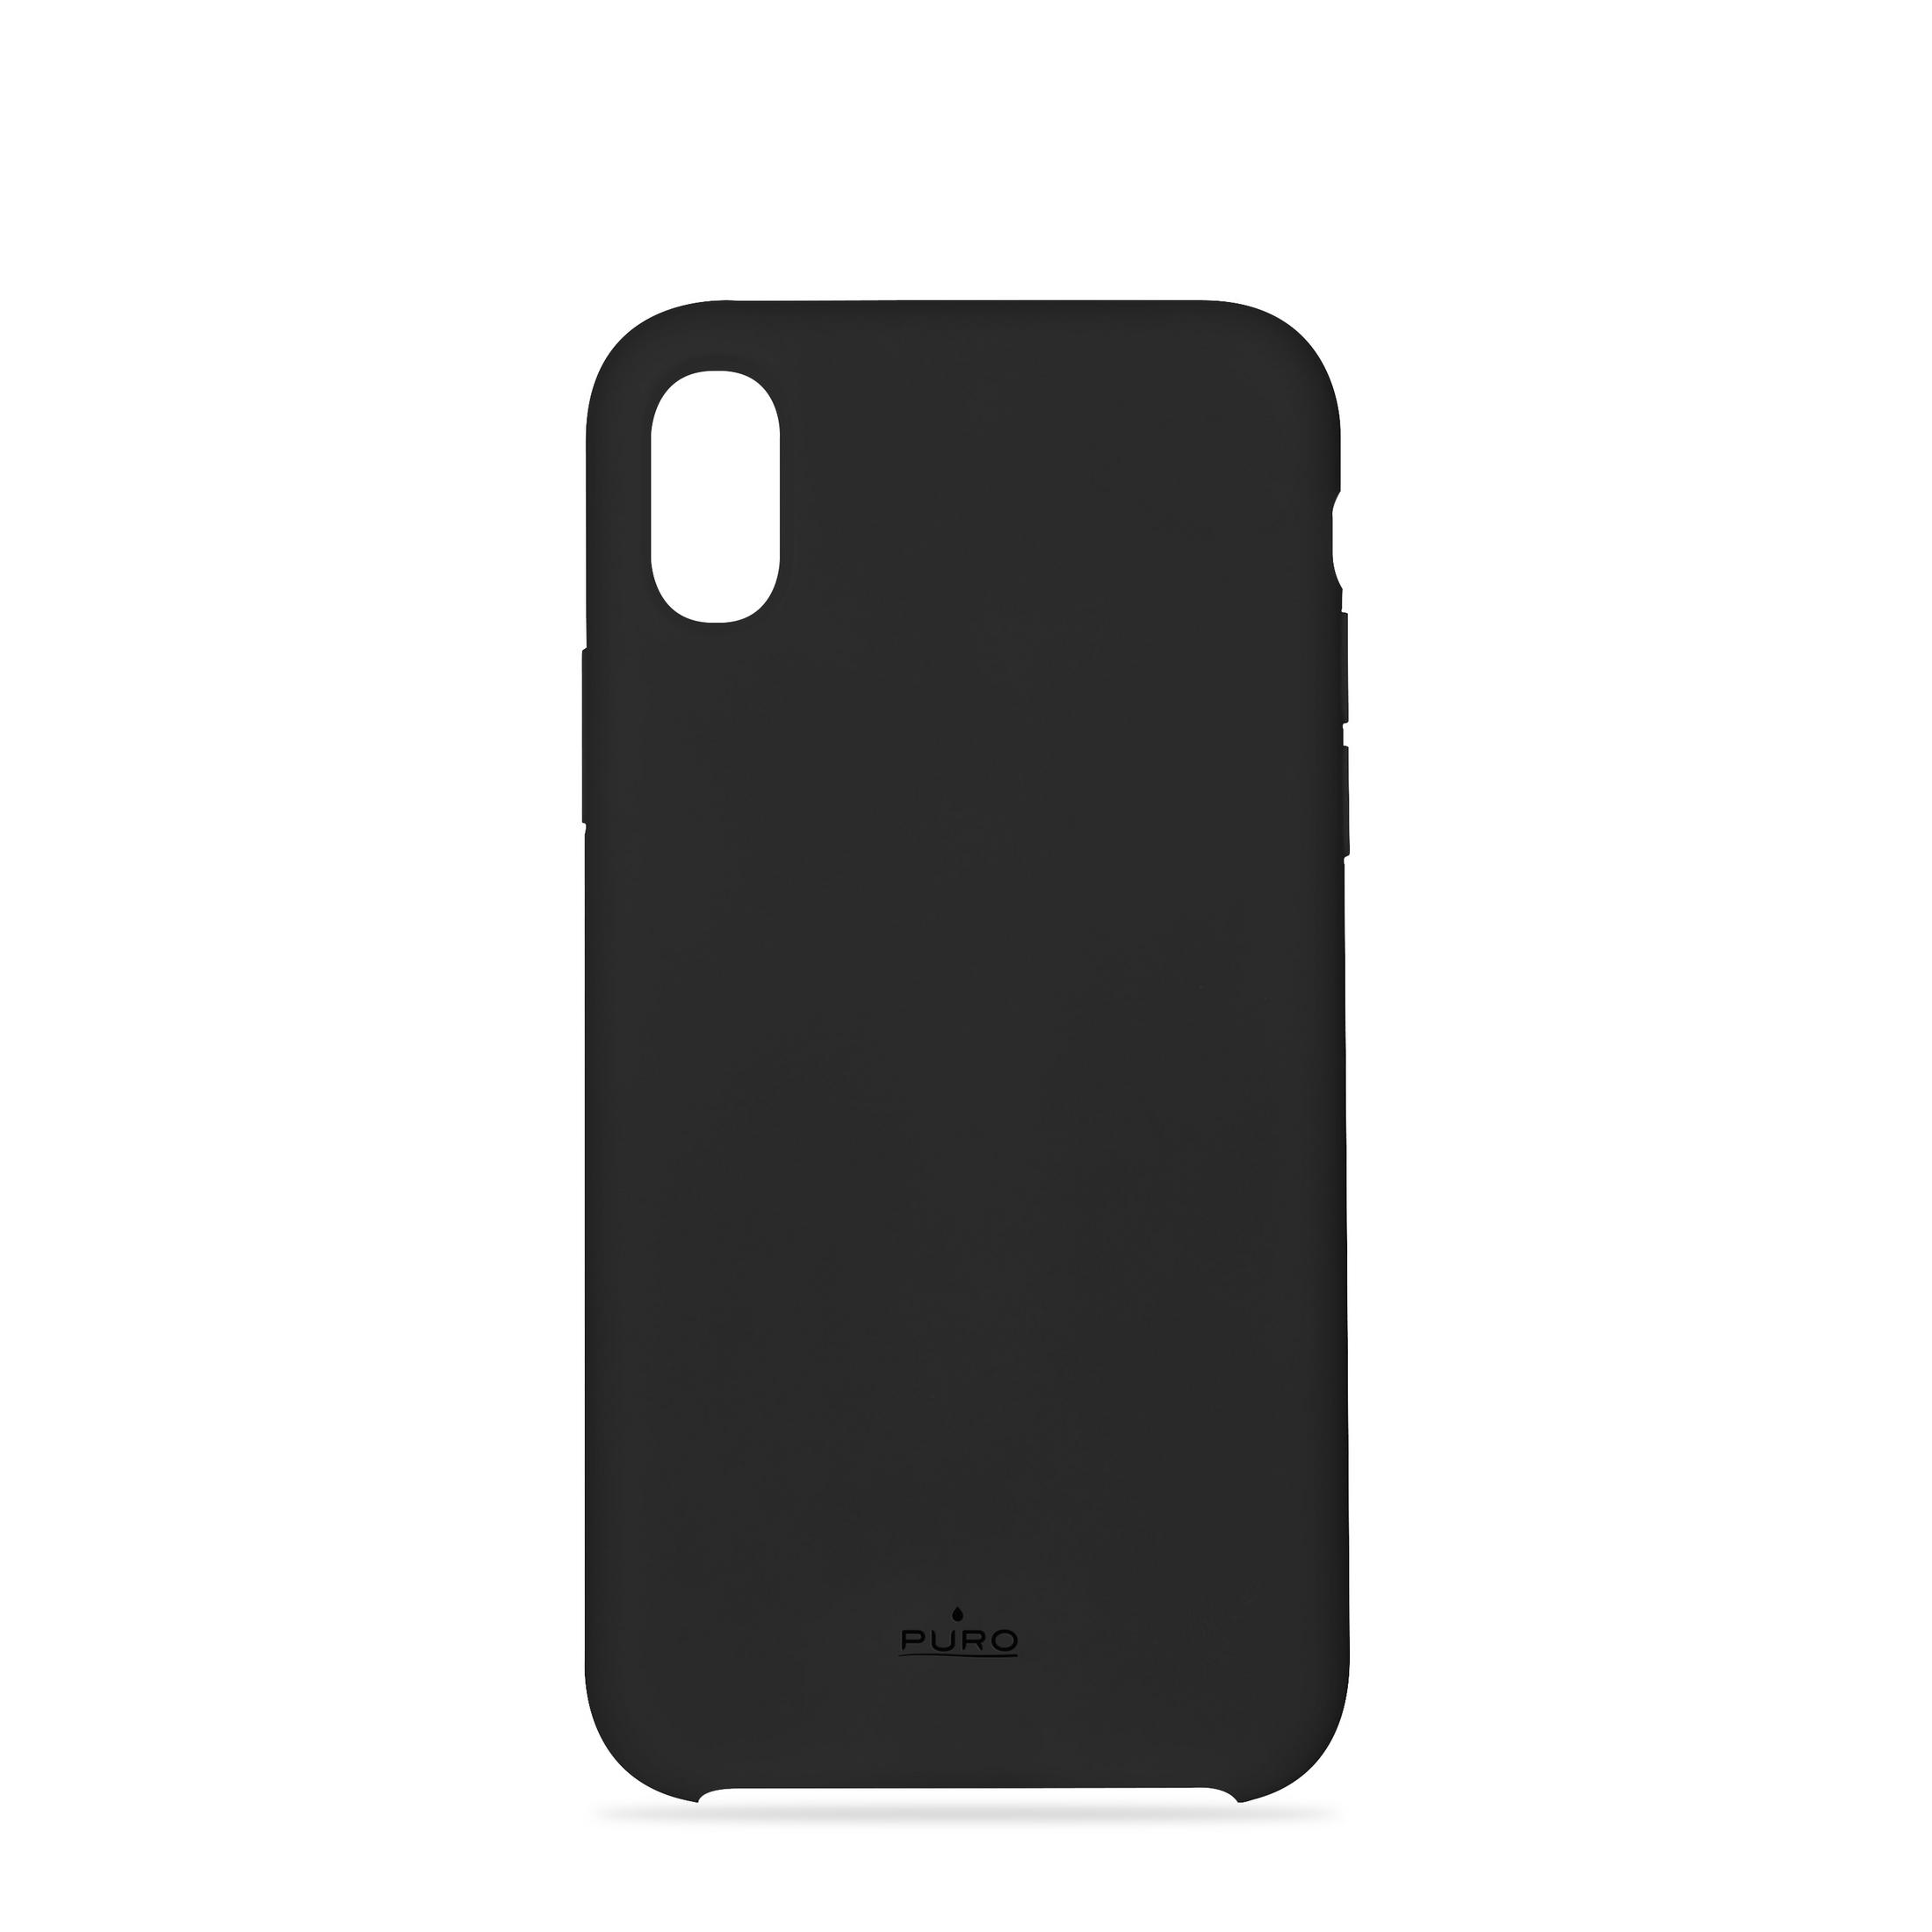 PURO Backcover, Schwarz BLACK, IPCXICONBLK X, iPhone FOR X IPHONE SILICON COVER Apple, 5,8\